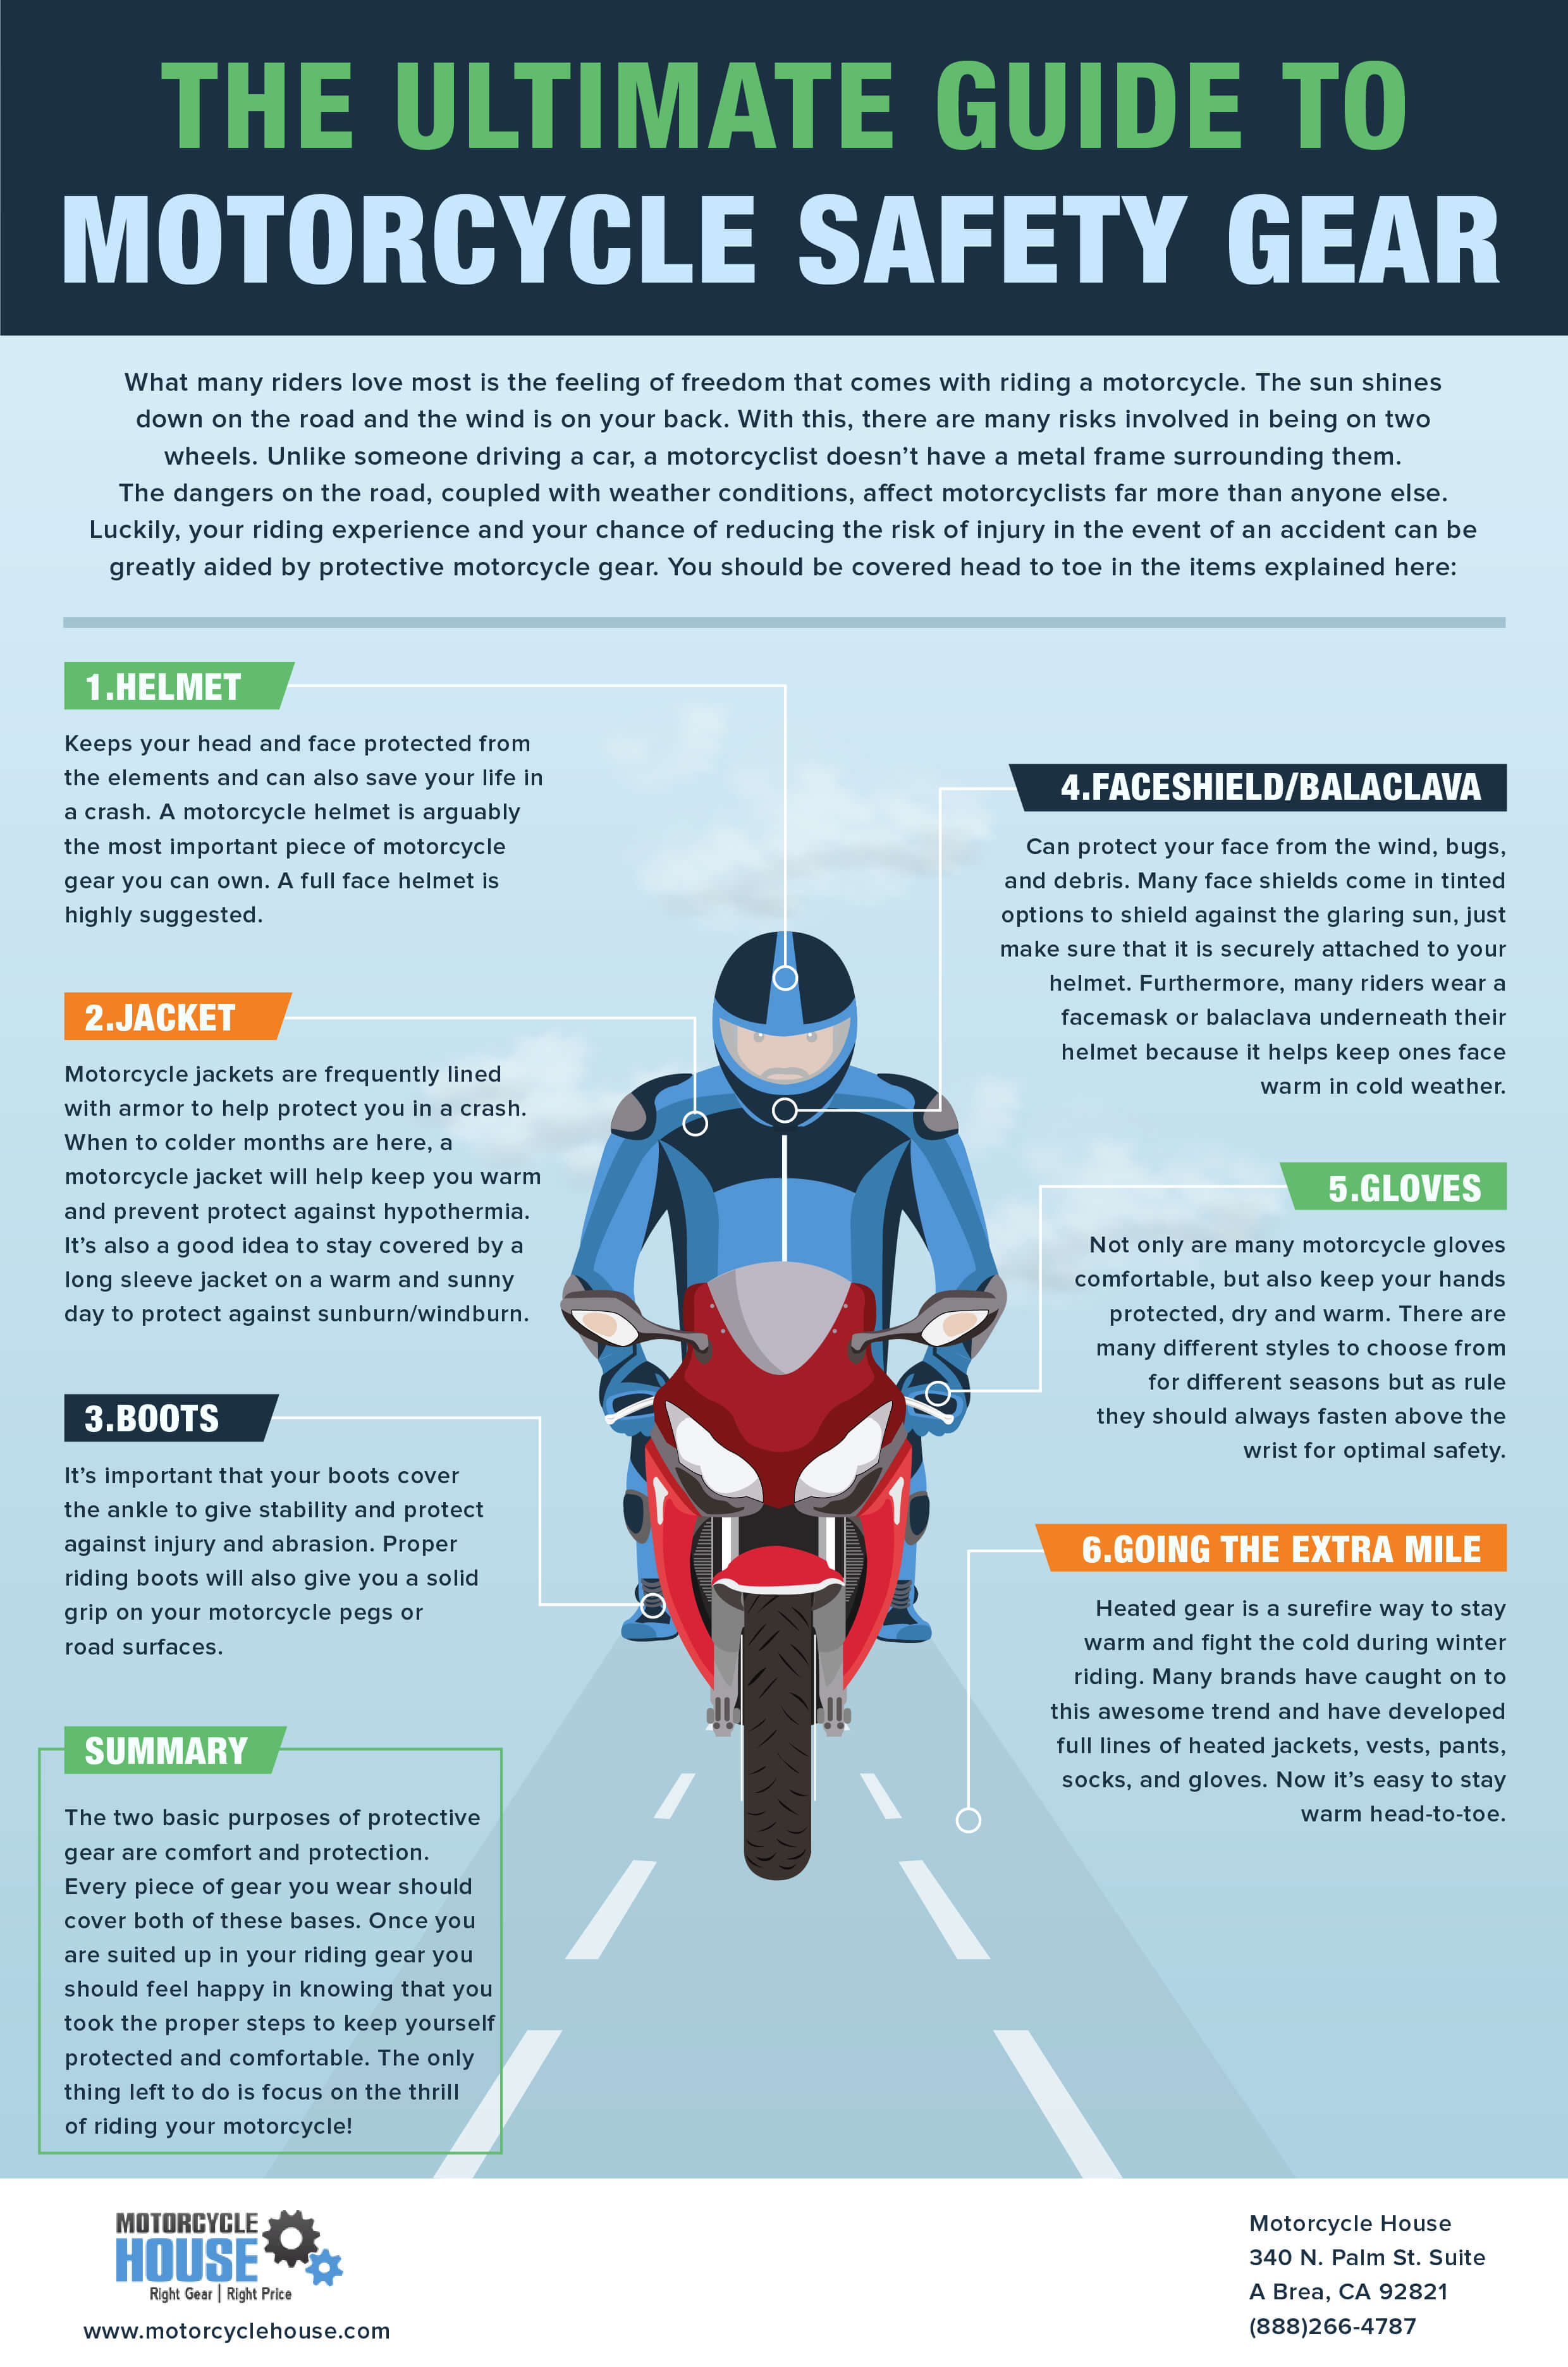 Motorcycle Safety Equipment : 5 Motorcycle Safety Gear Every Rider Must